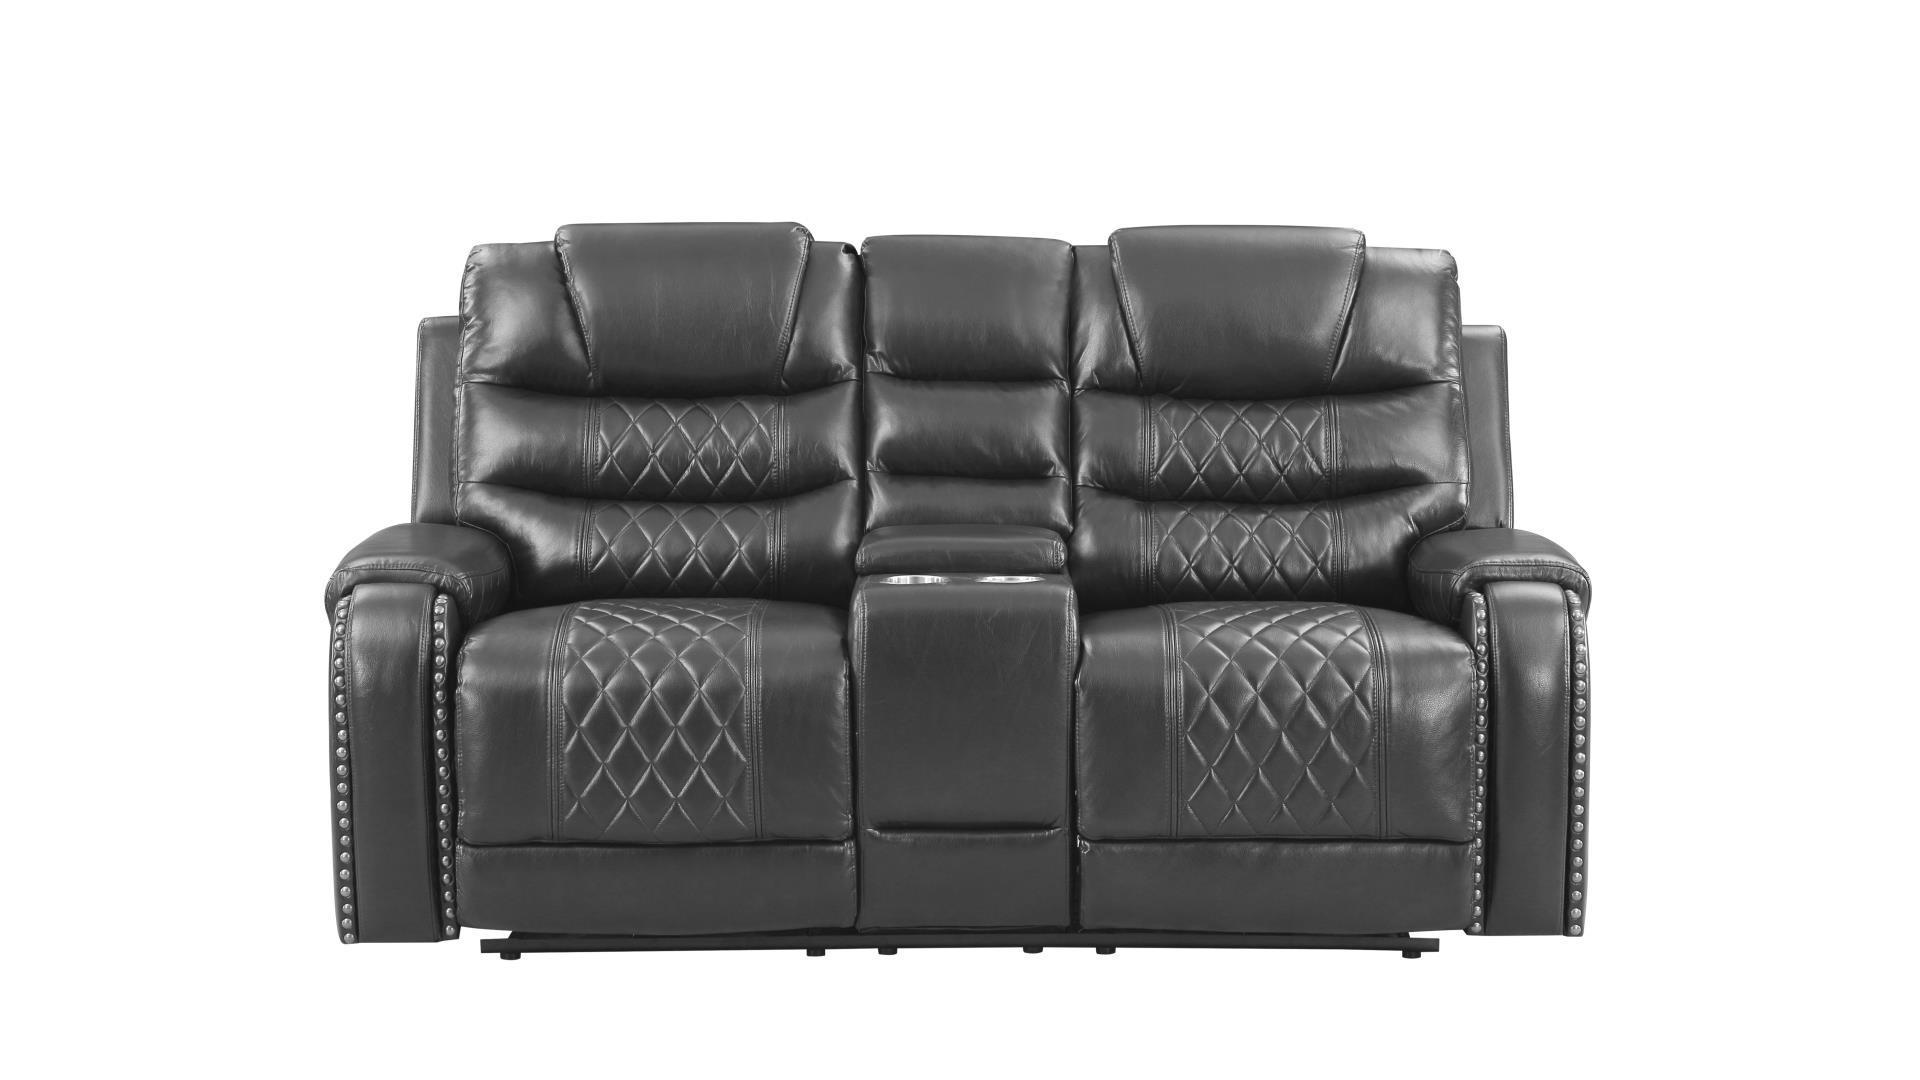 Contemporary, Modern Recliner Loveseat TENNESSEE-GR TENNESSEE-GR-L in Gray Eco Leather